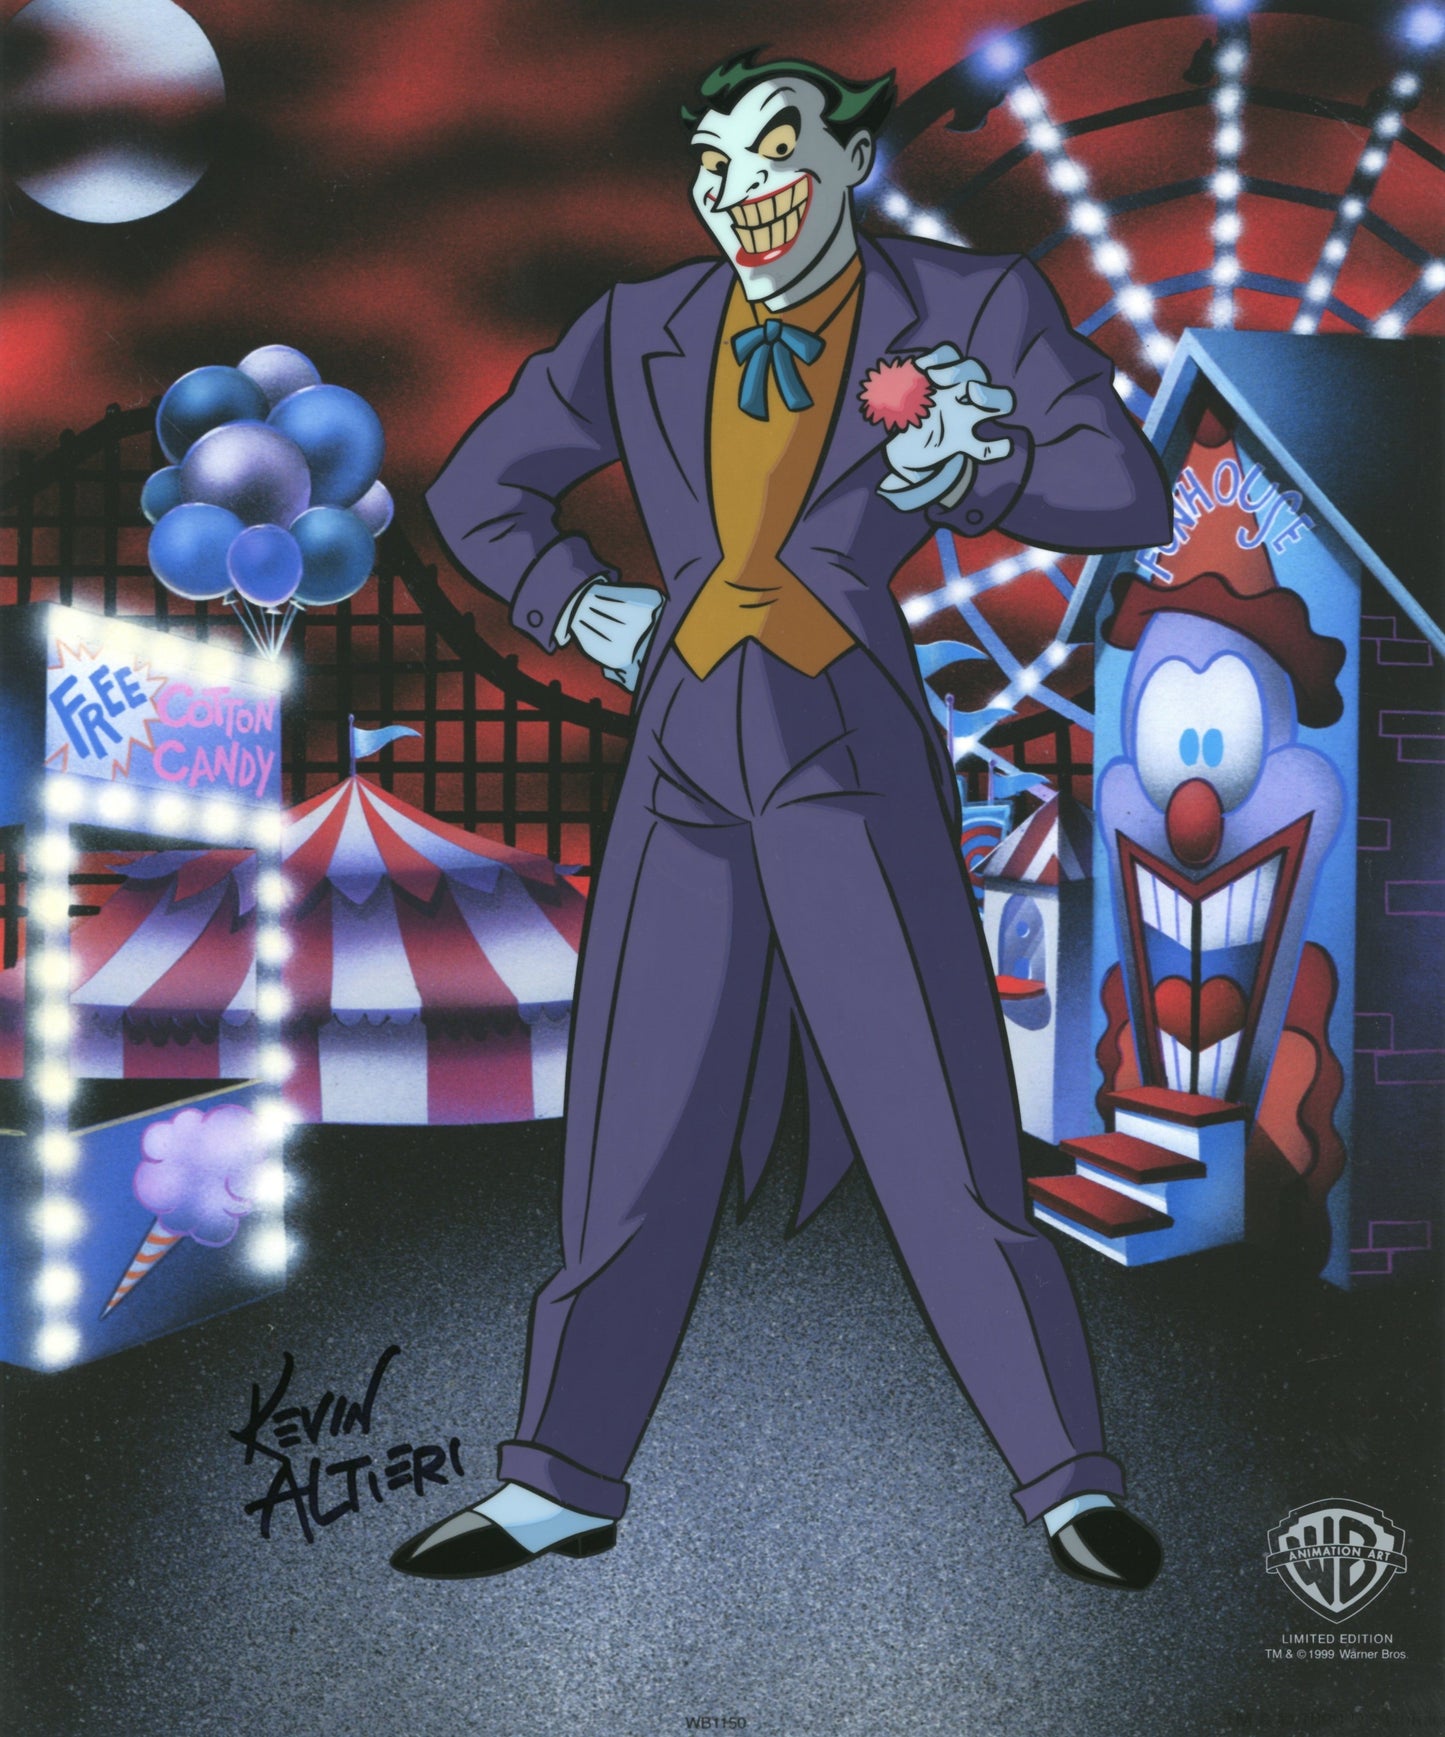 Classic Joker Signed by Kevin Altieri Batman Animated Series